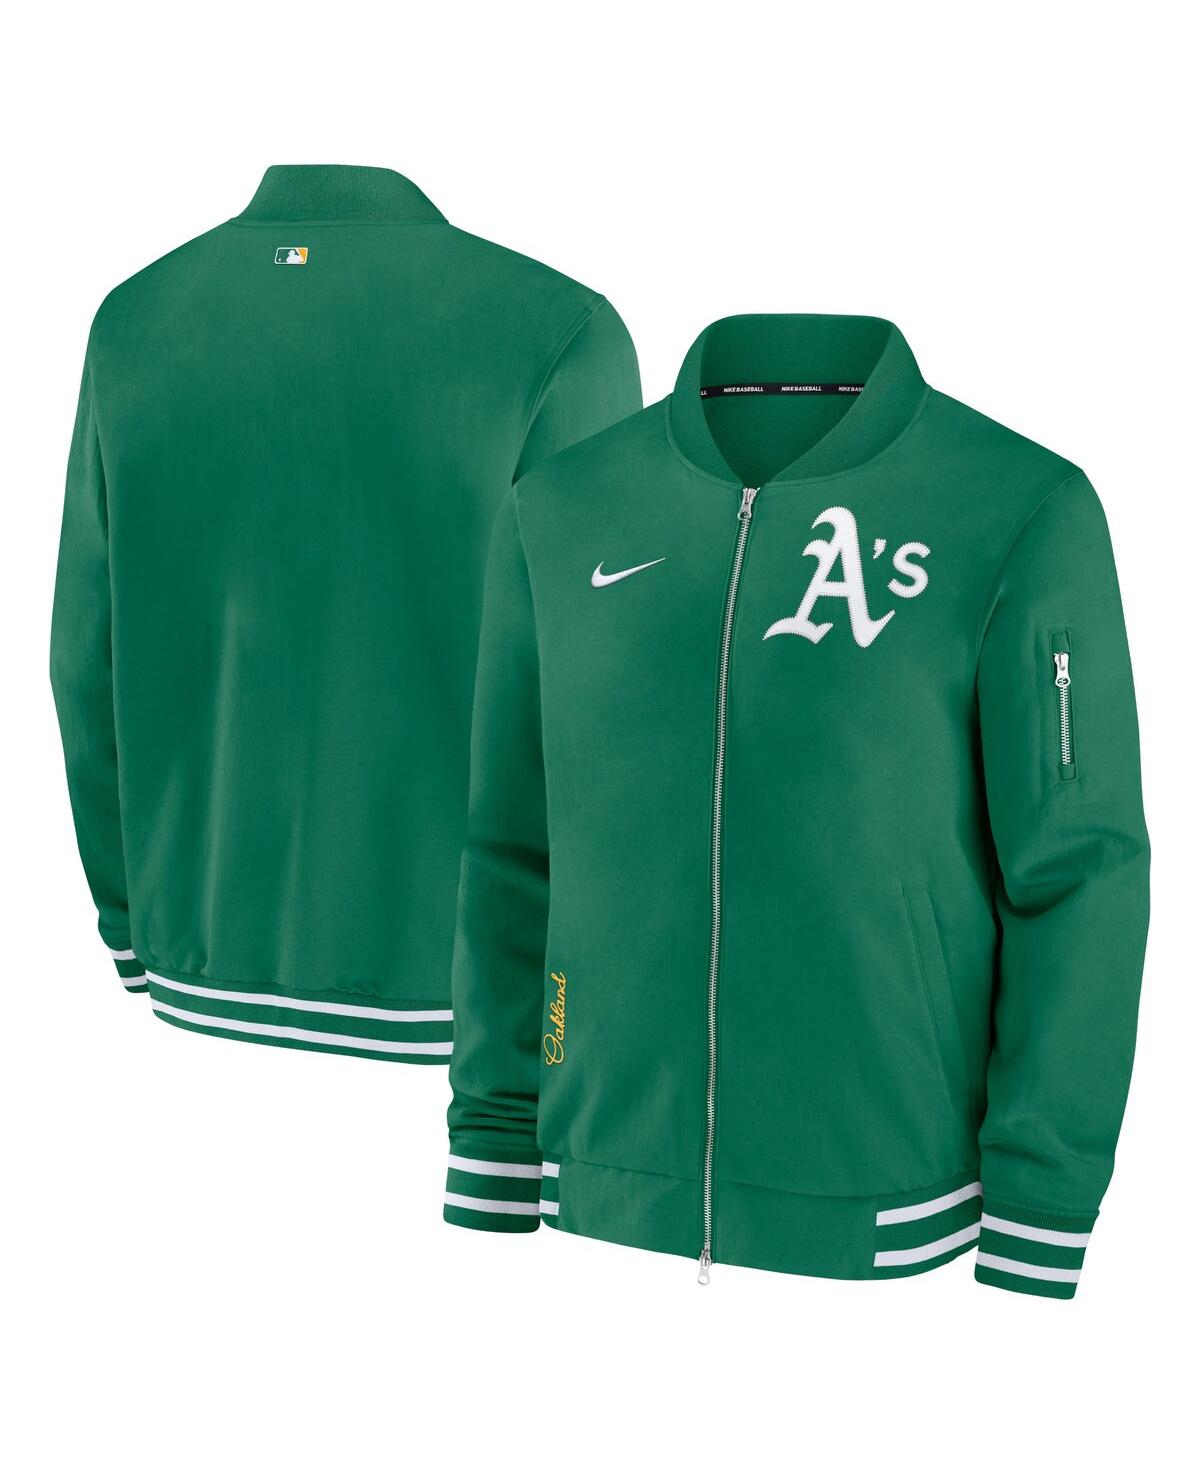 Men's Nike Green Oakland Athletics Authentic Collection Full-Zip Bomber Jacket - Green